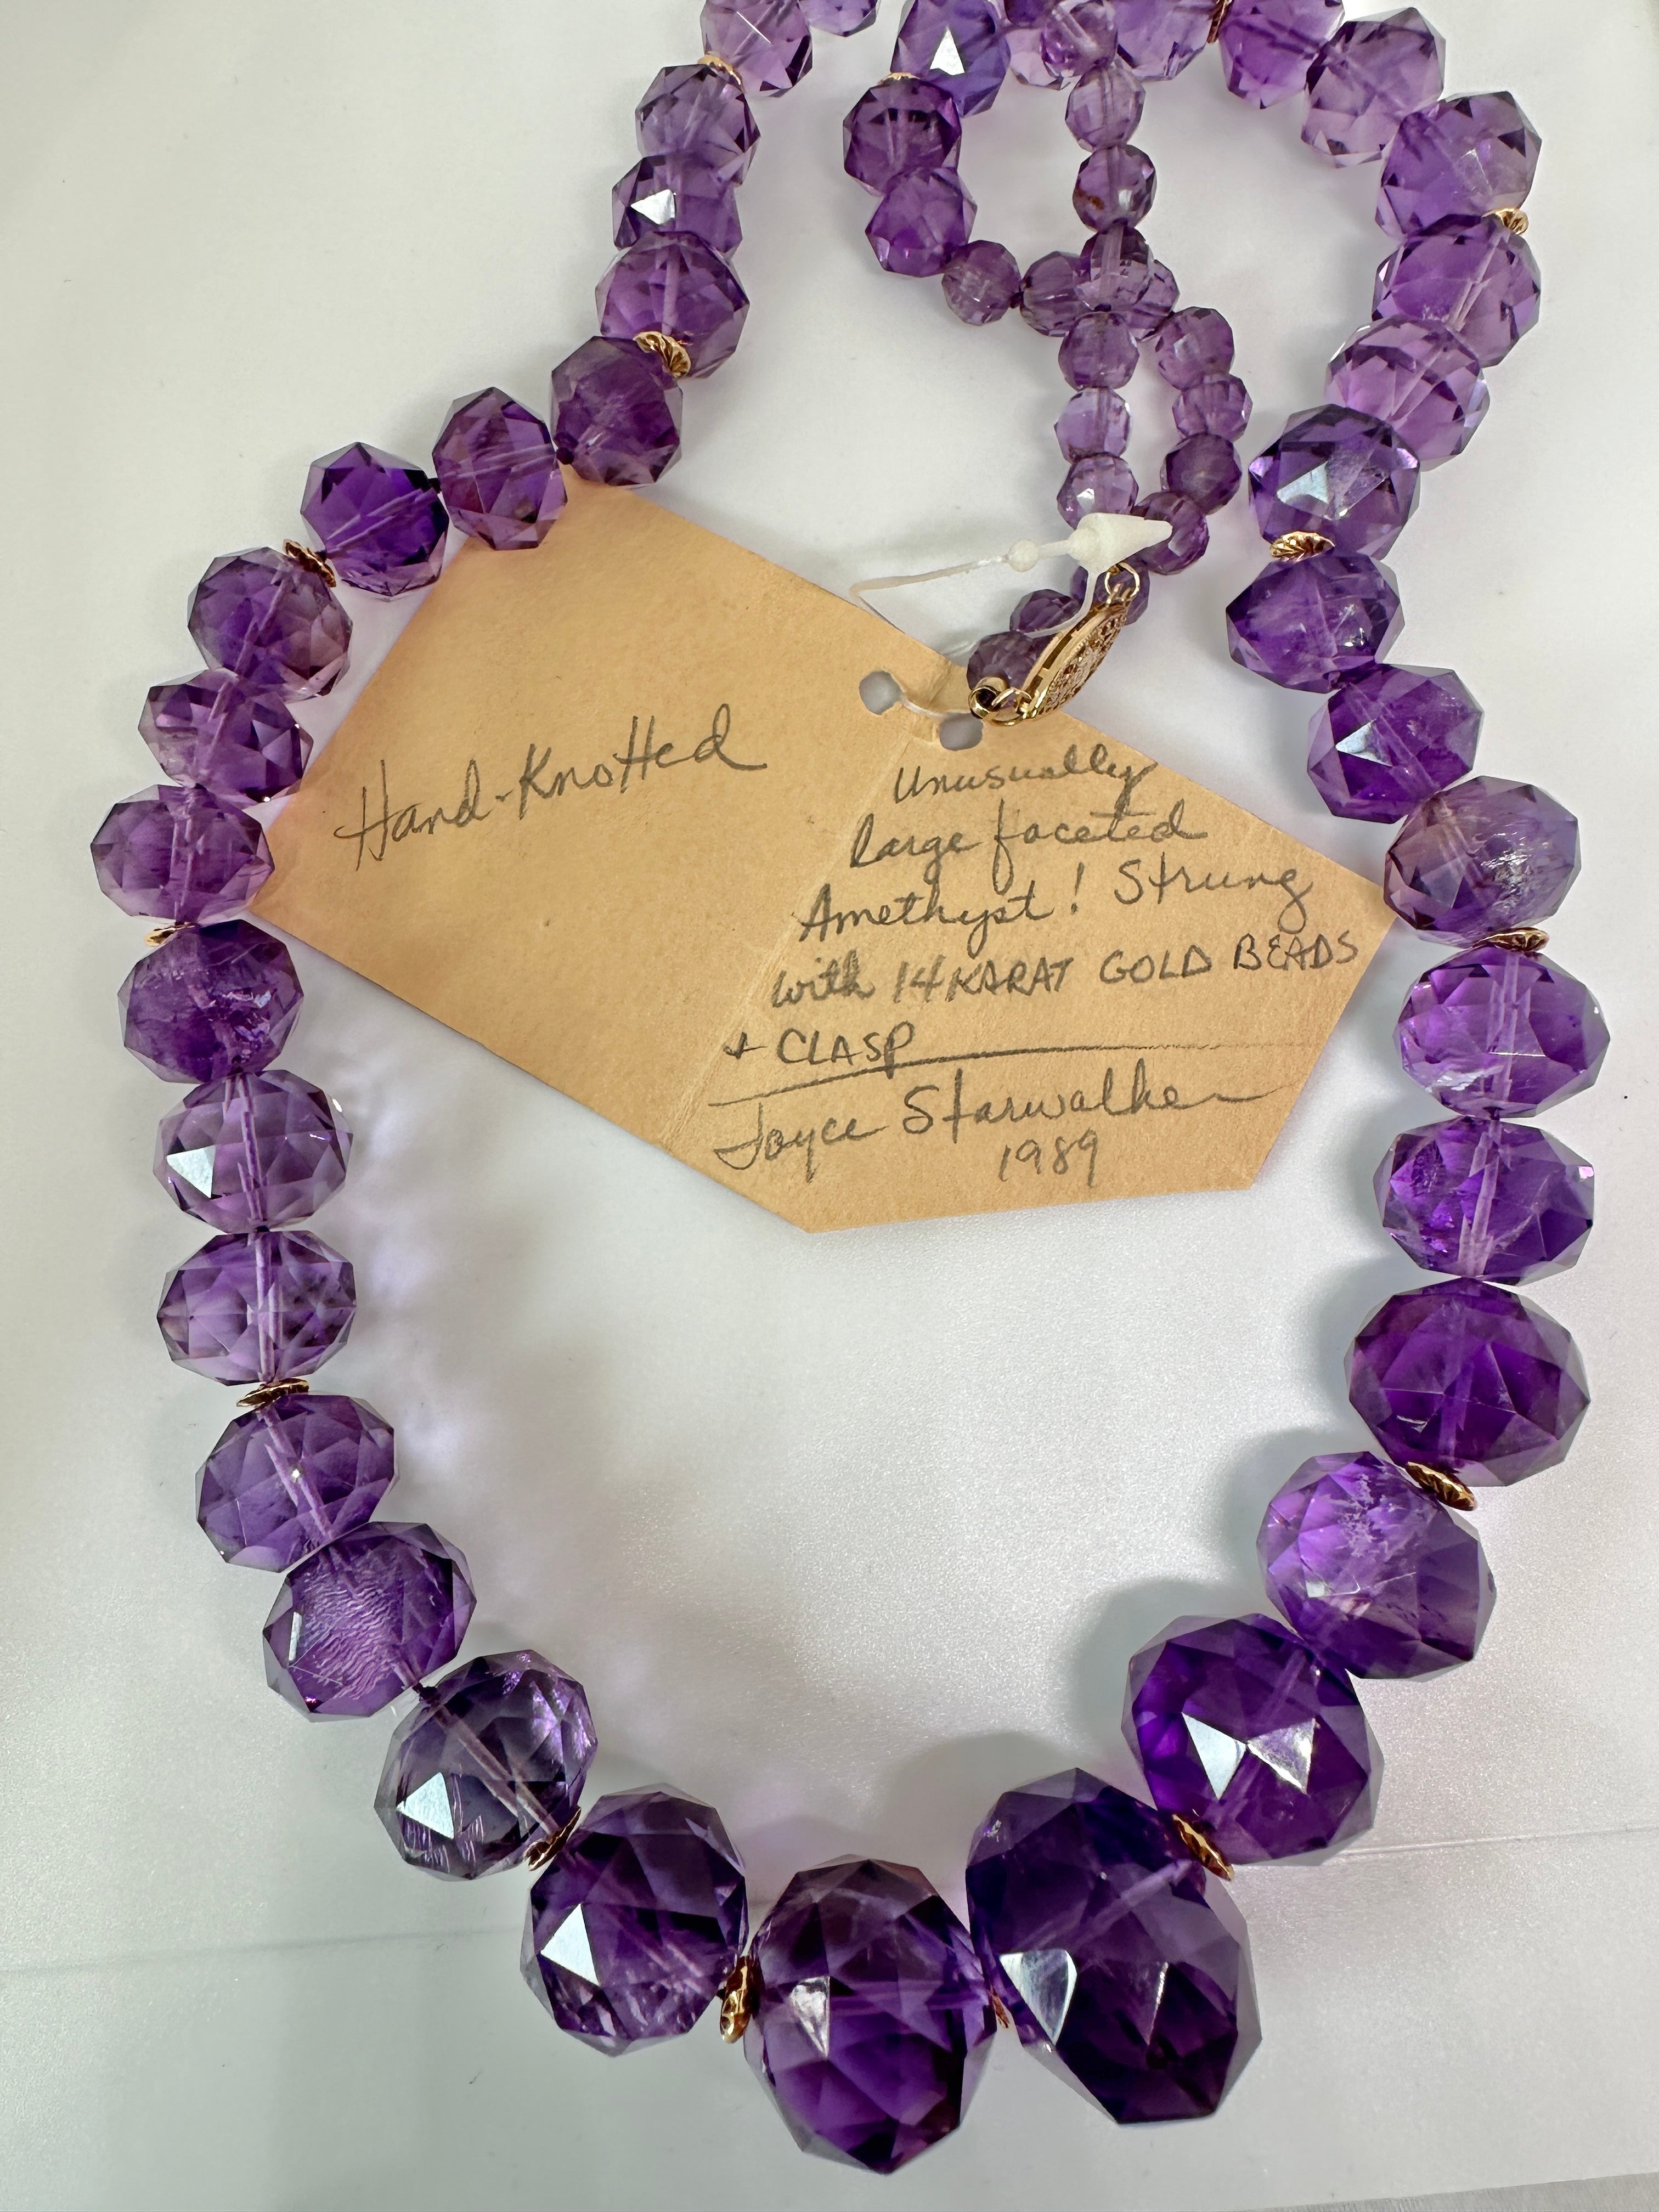 This is a spectacular 26.5 inch Amethyst Bead Necklace with 14 Karat Yellow Gold spacer beads and clasp.  The necklace is a masterwork by the Native American Artist Joyce Starwalker and the necklace has her original tag from 1989.  The magnificent